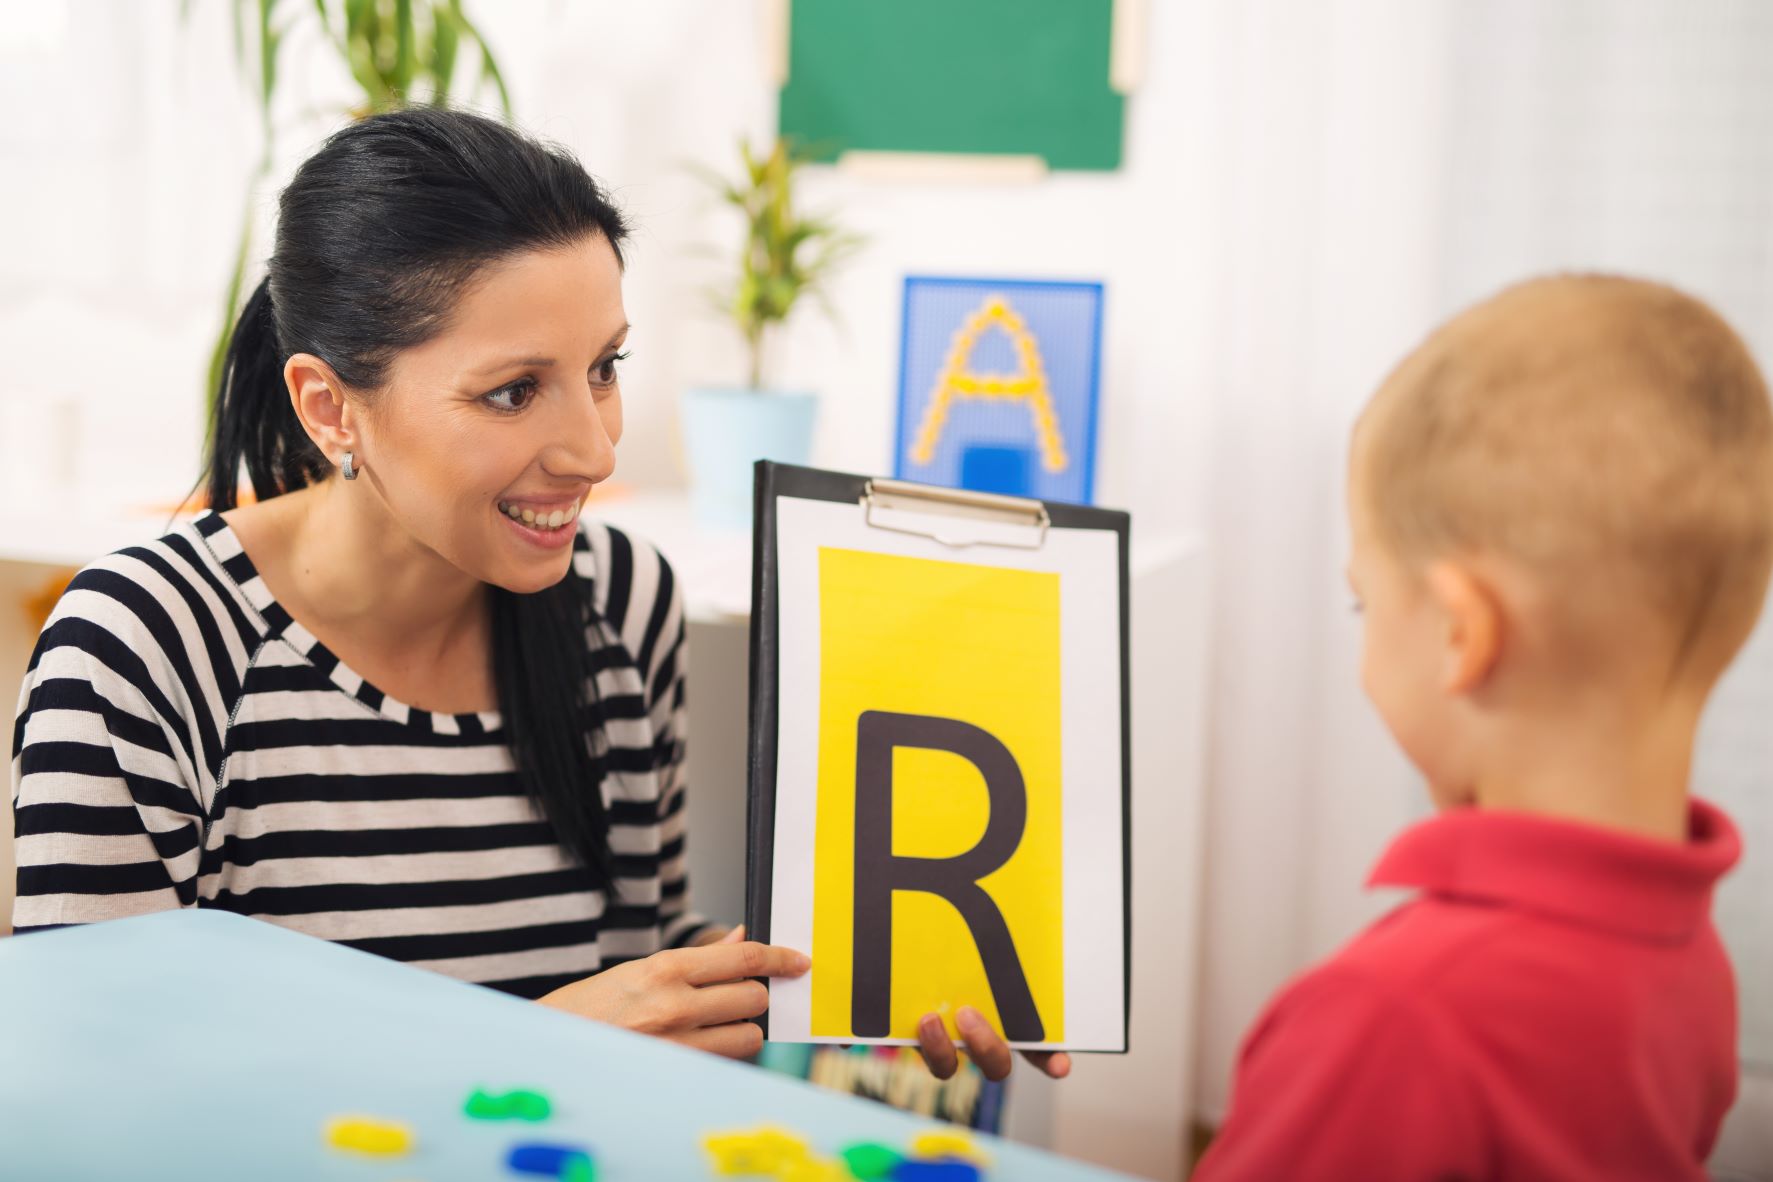 Woman showing letters to a child.